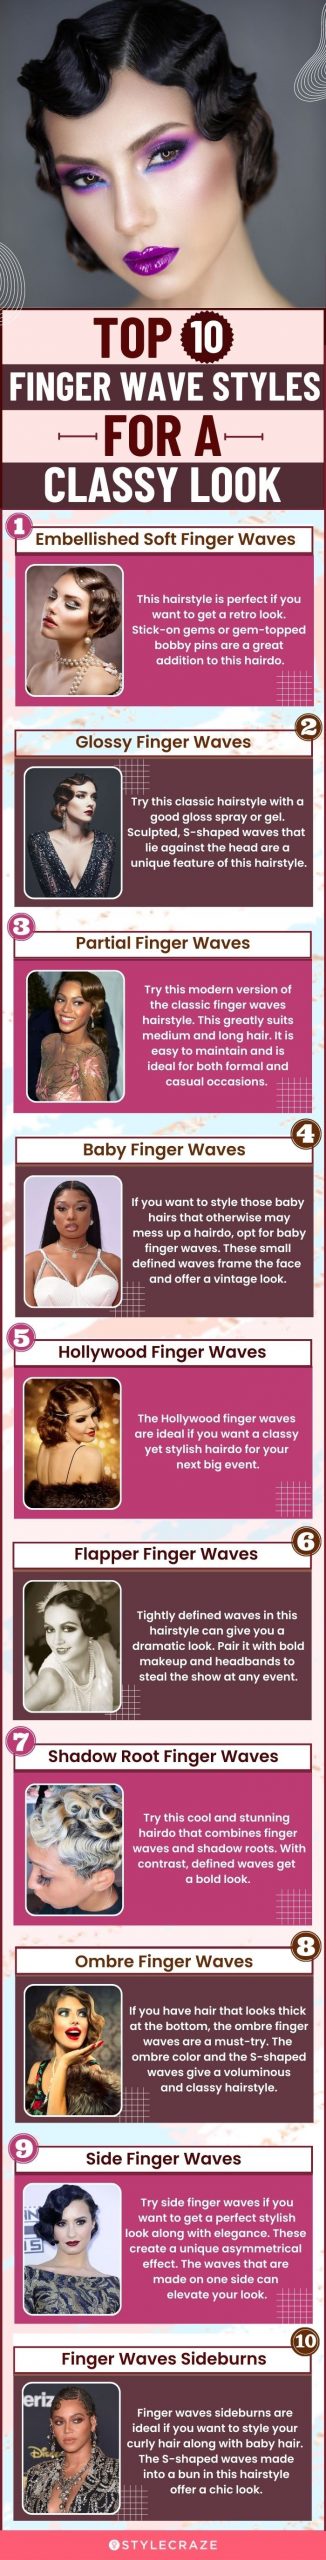 top 10 finger wave styles for a classy look (infographic)